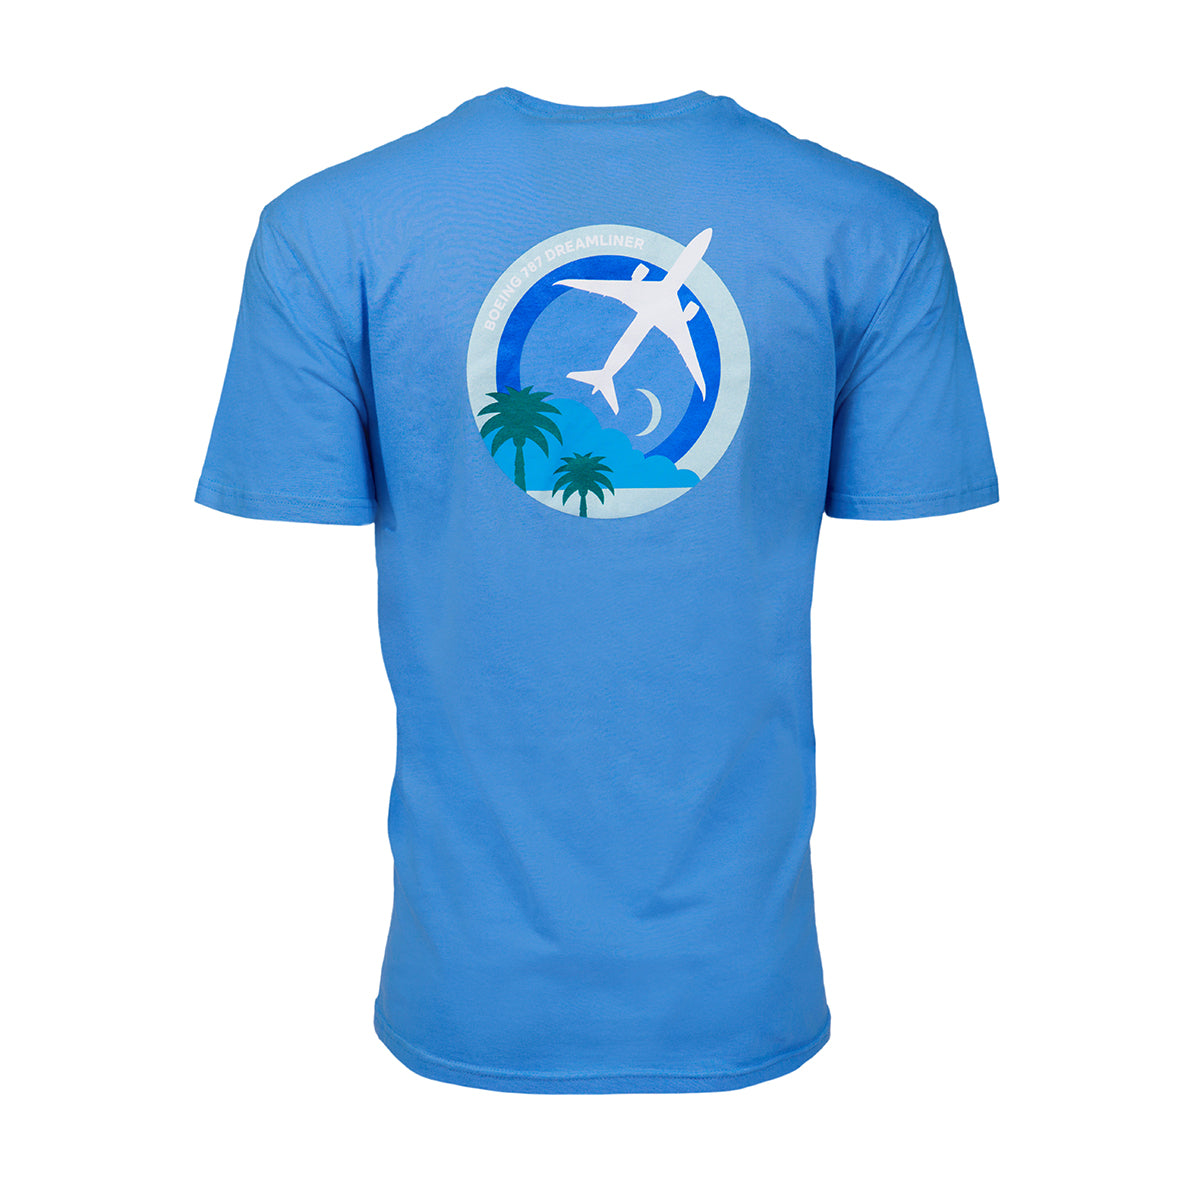 Full product image of the back side of the t-shirt in blue color.  Showing the Skyward graphic of the Boeing 787 Dreamliner.